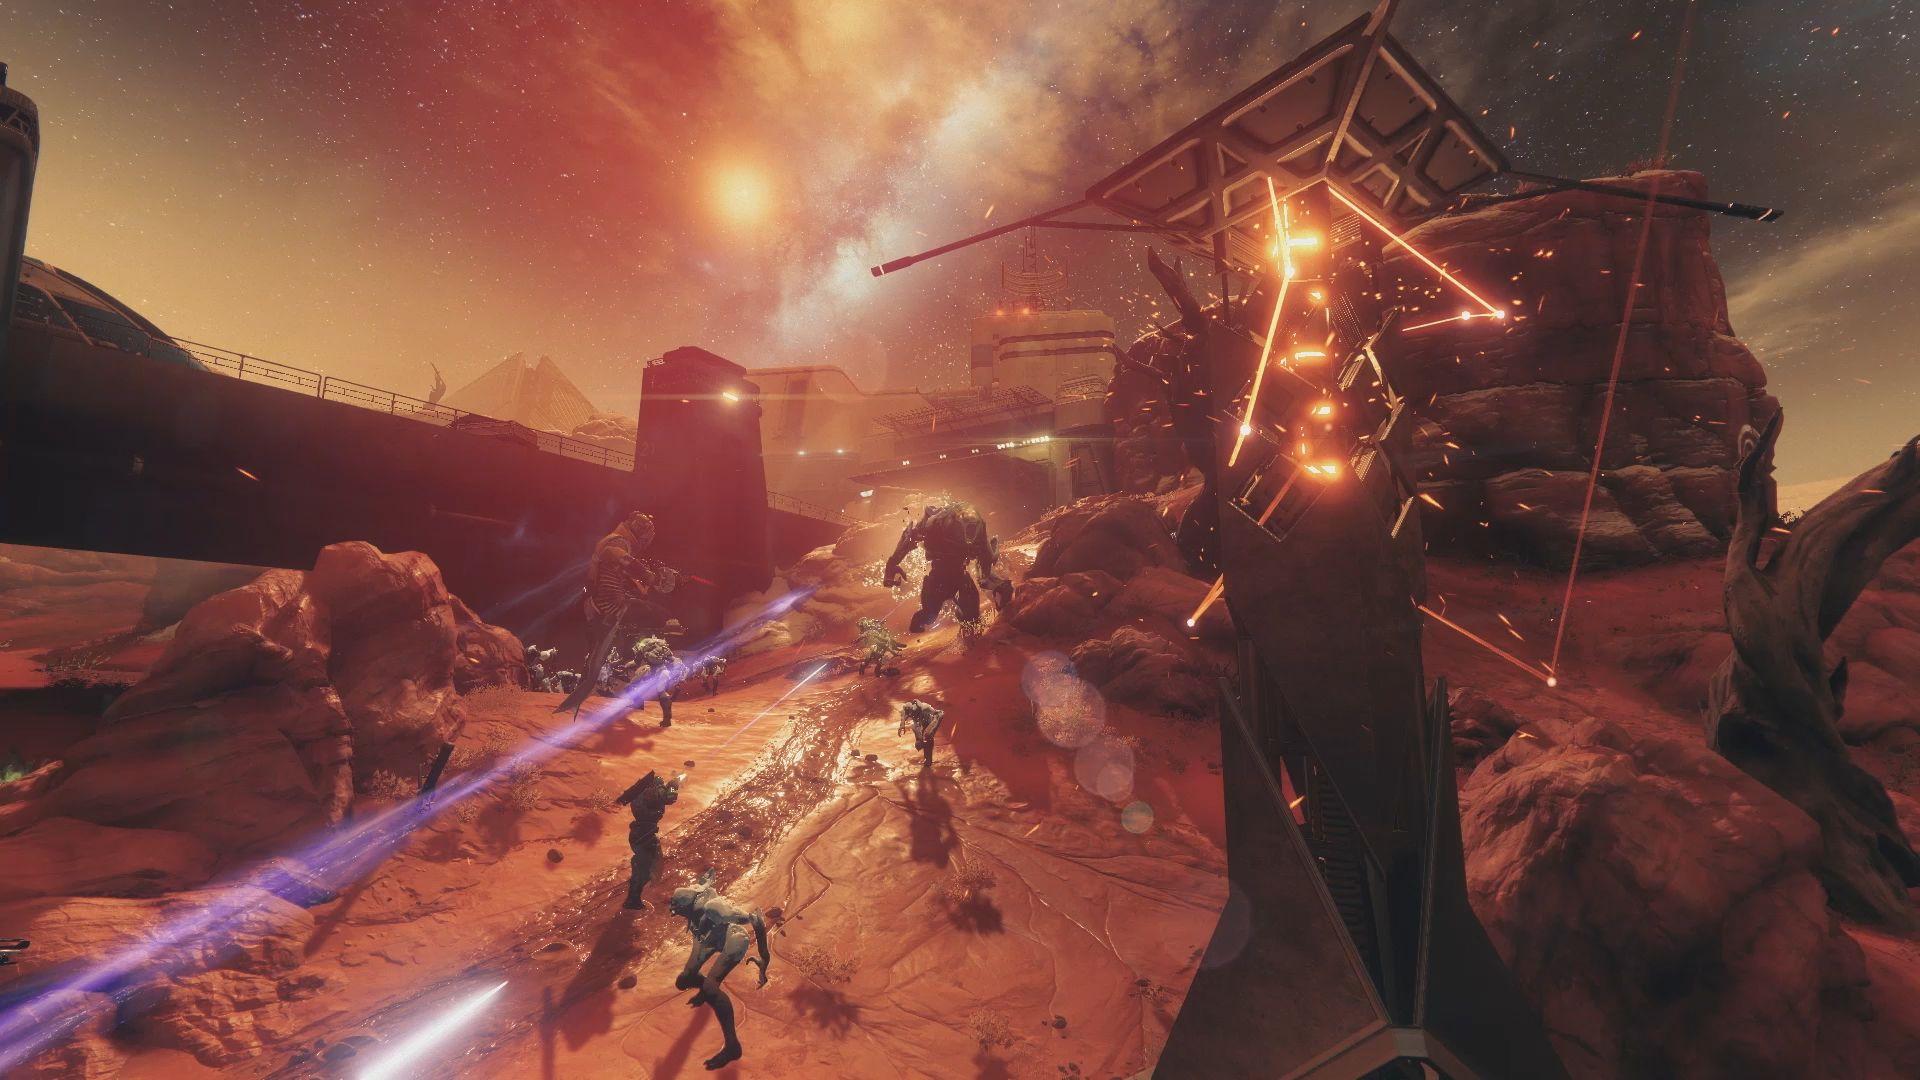 Destiny 2 Warmind is Now Available, The Beginning of Season 3 Brings